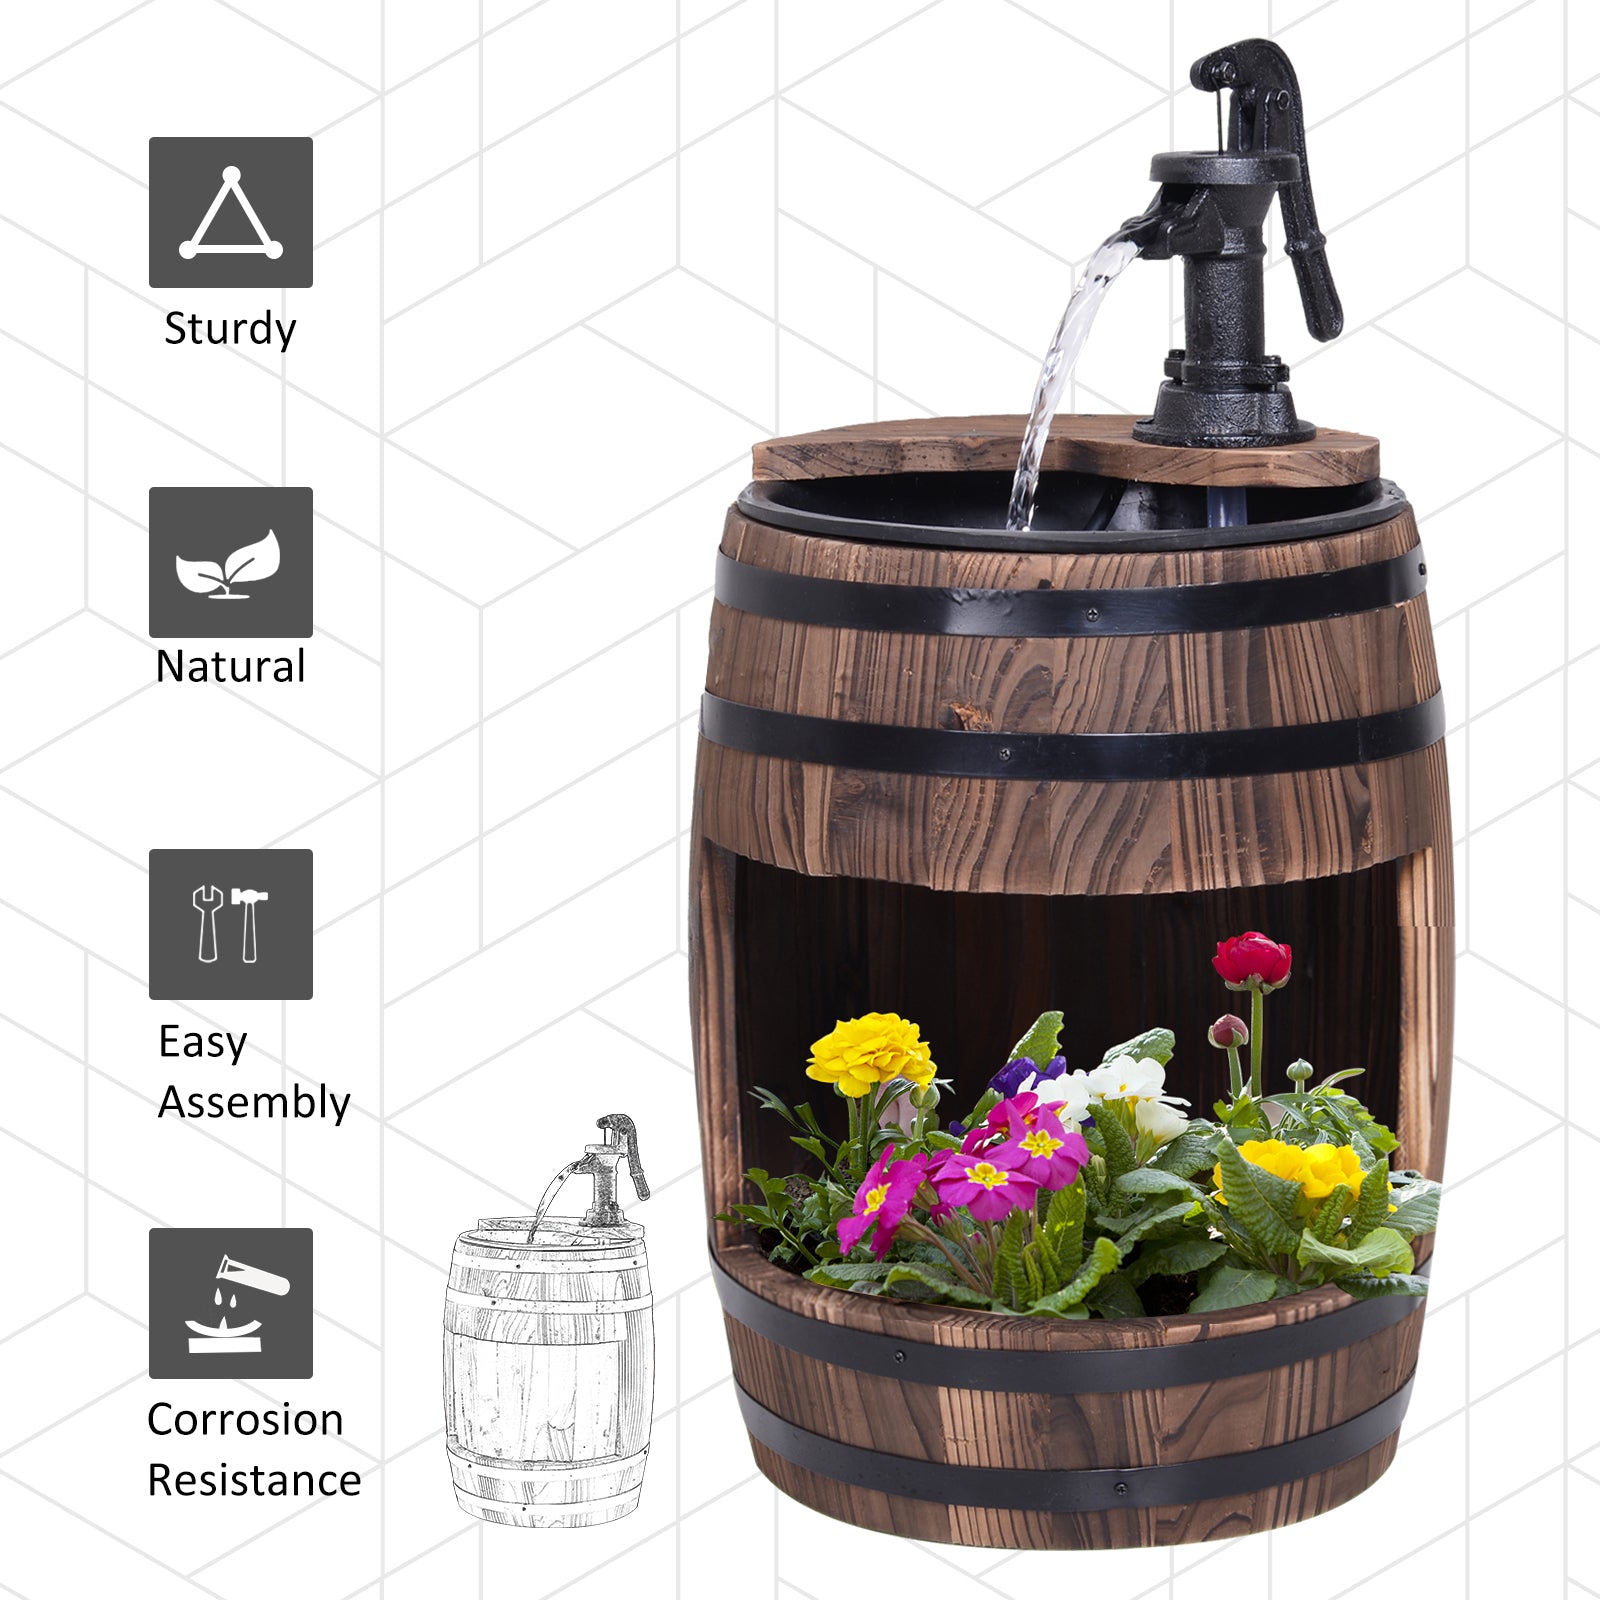 Outsunny Wood Barrel Patio Water Fountain Electric Pump Garden Decorative Ornament with Flower Planter Decor